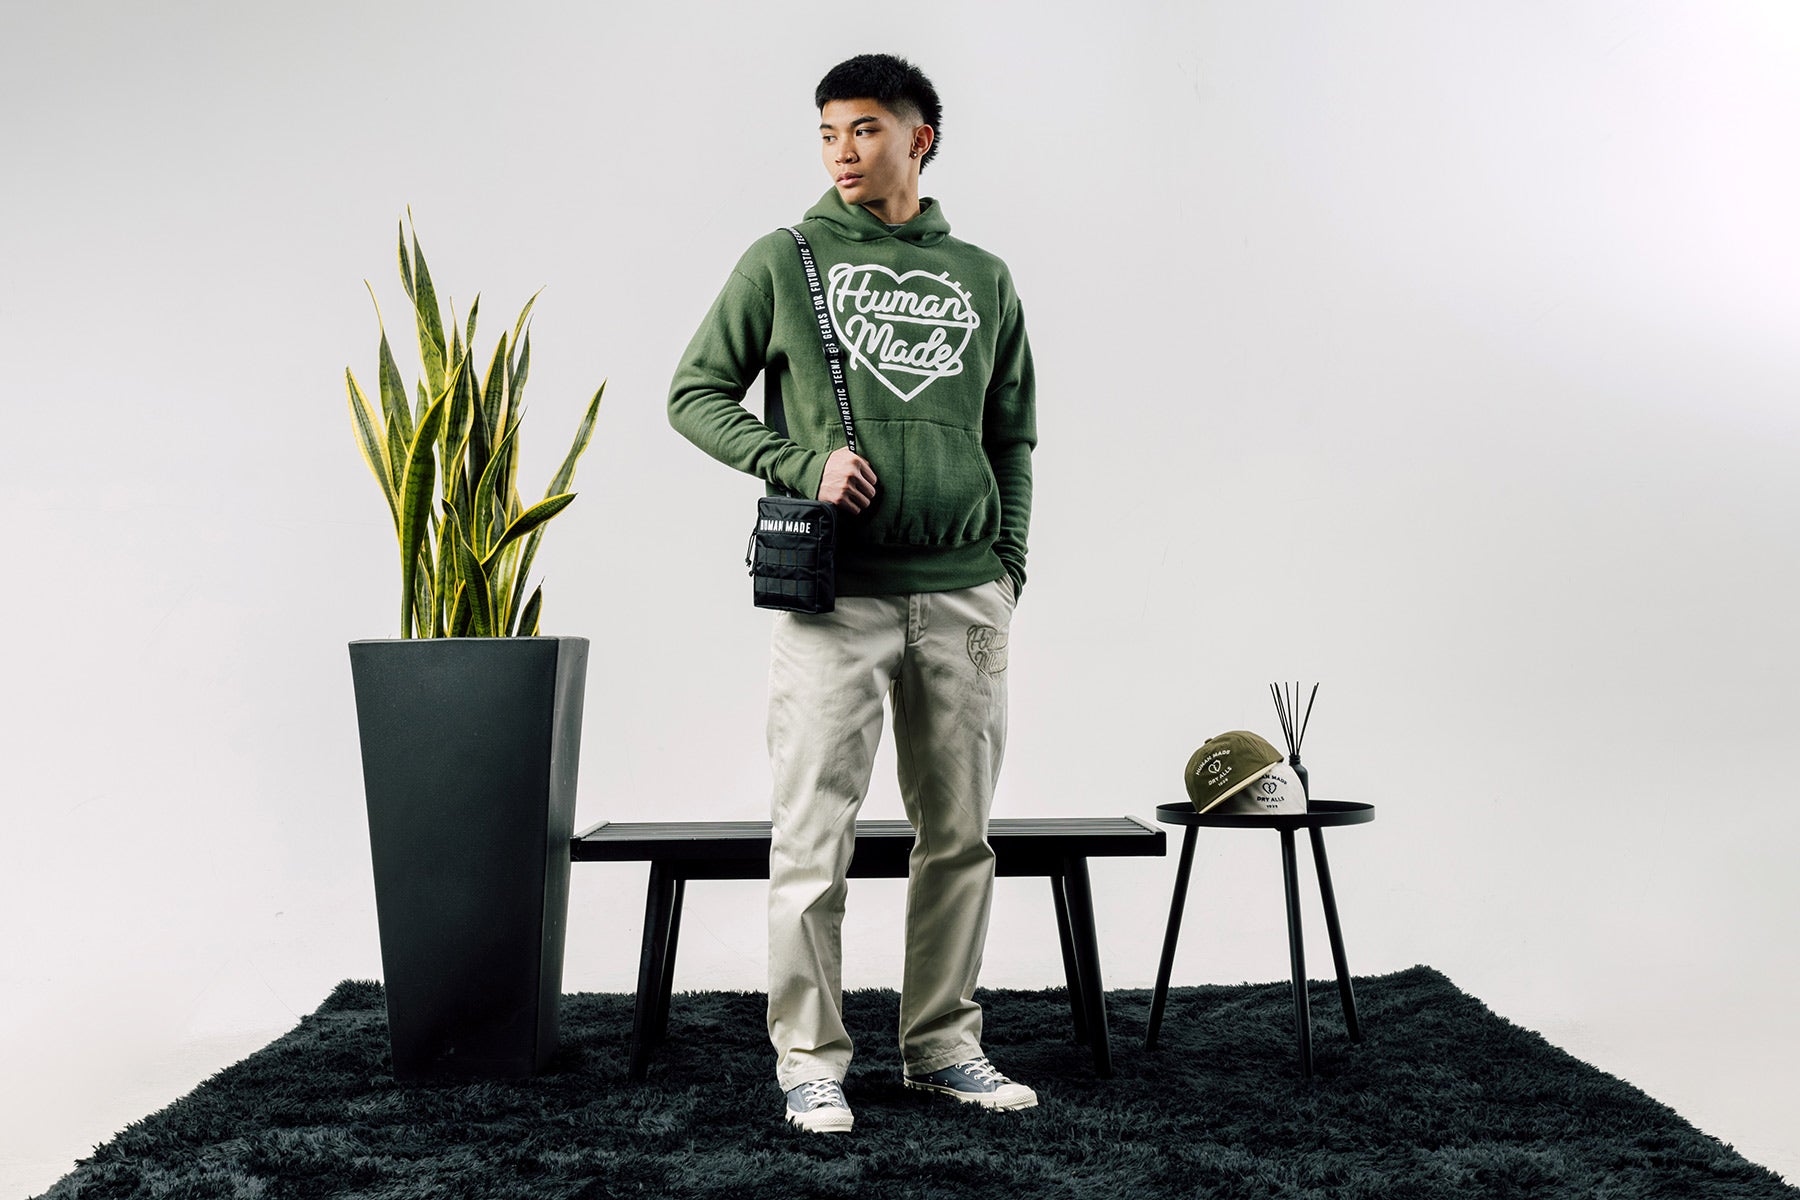 NIGO AND HUMAN MADE  If You Like Street Fashion, Then You Must Not Miss  Out His Story. 